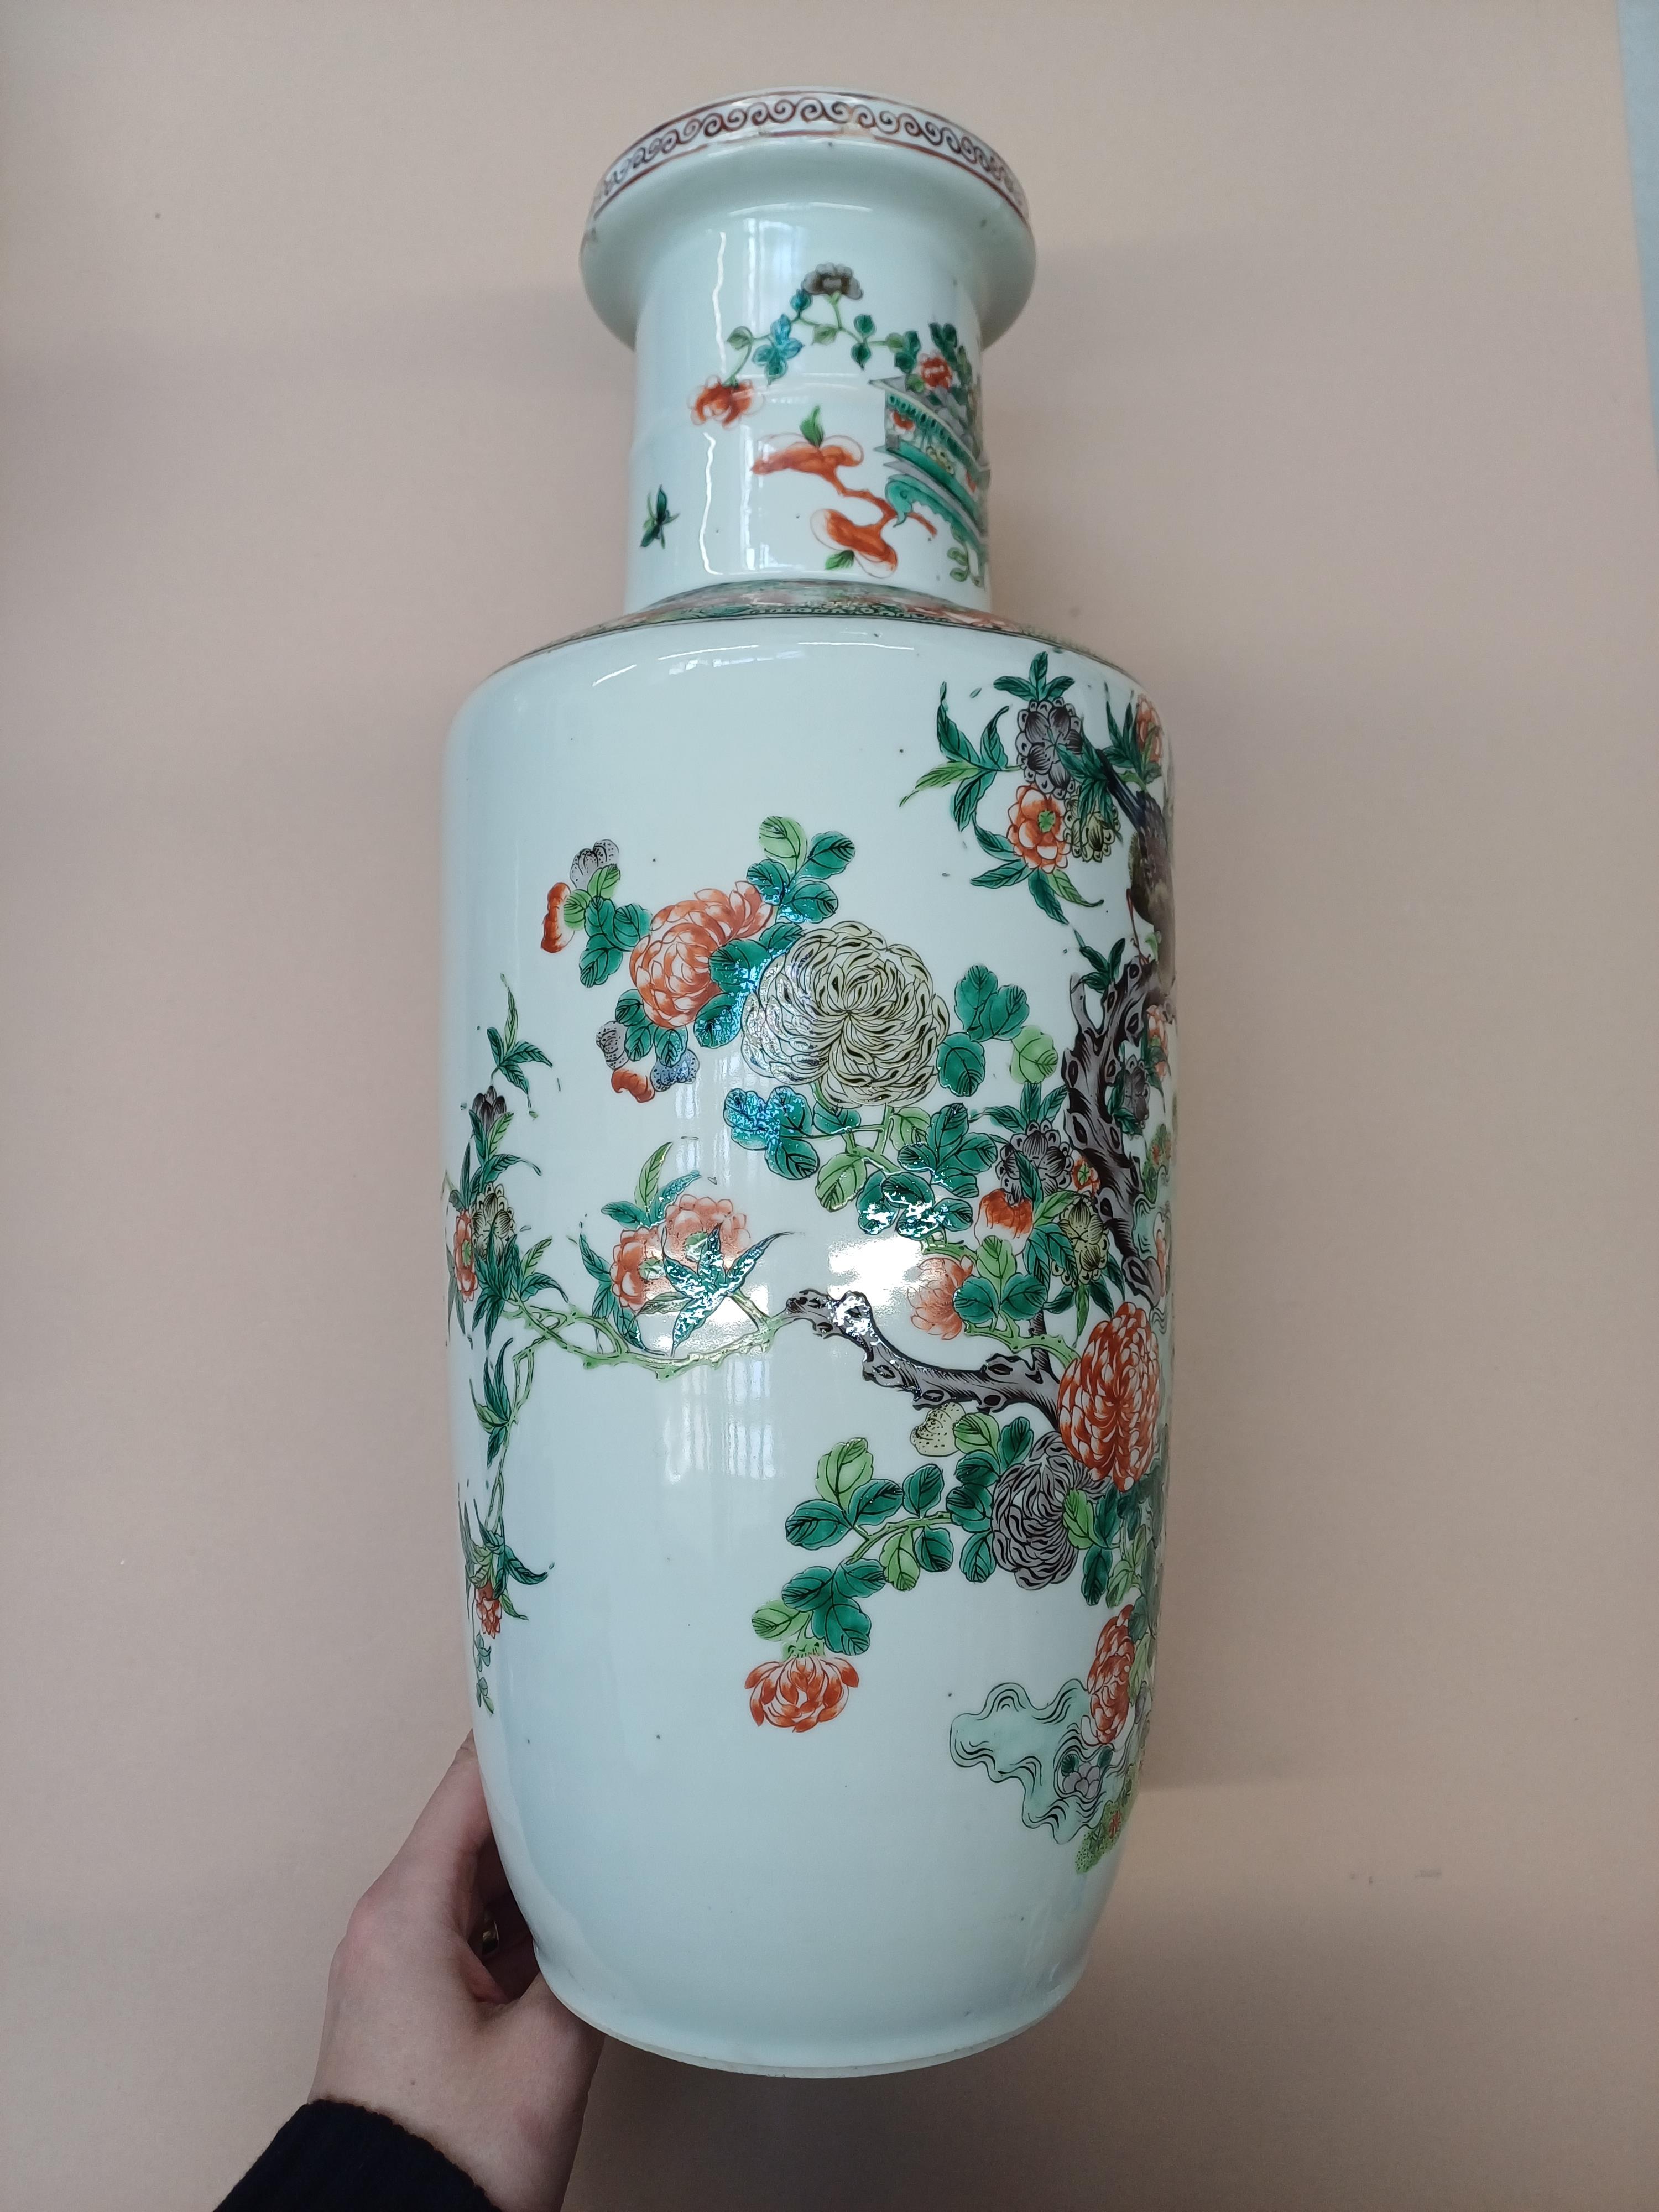 A PAIR OF FINE CHINESE FAMILLE-VERTE ‘BIRD AND BLOSSOM’ VASES 清康熙 五彩花鳥圖紋瓶一對 - Image 7 of 16